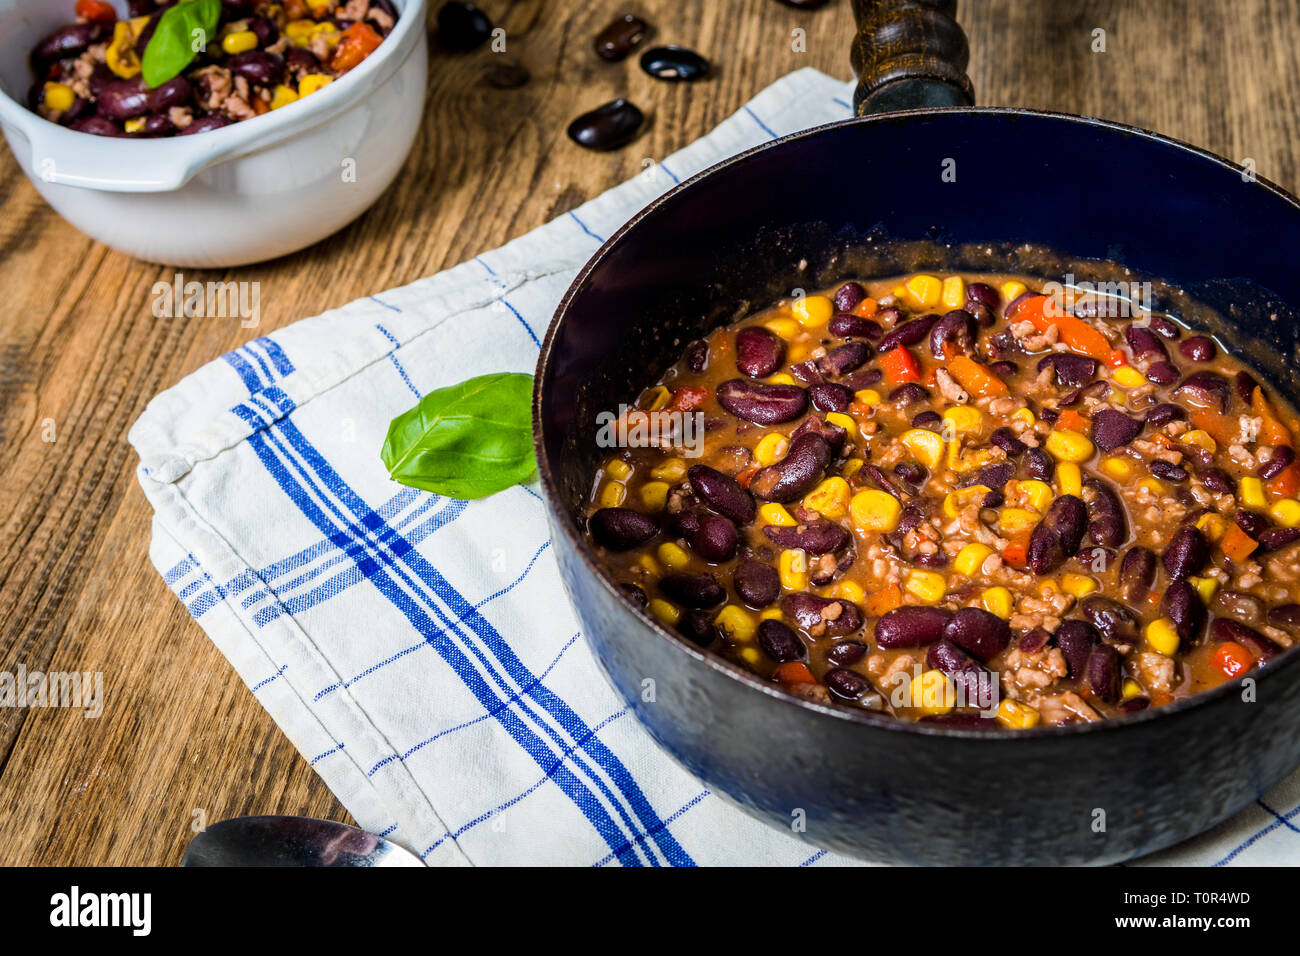 Chili or chilli corn carne. Cooked kidney bean, minced meat, chili, corn and pepper in pan  on wood table Stock Photo